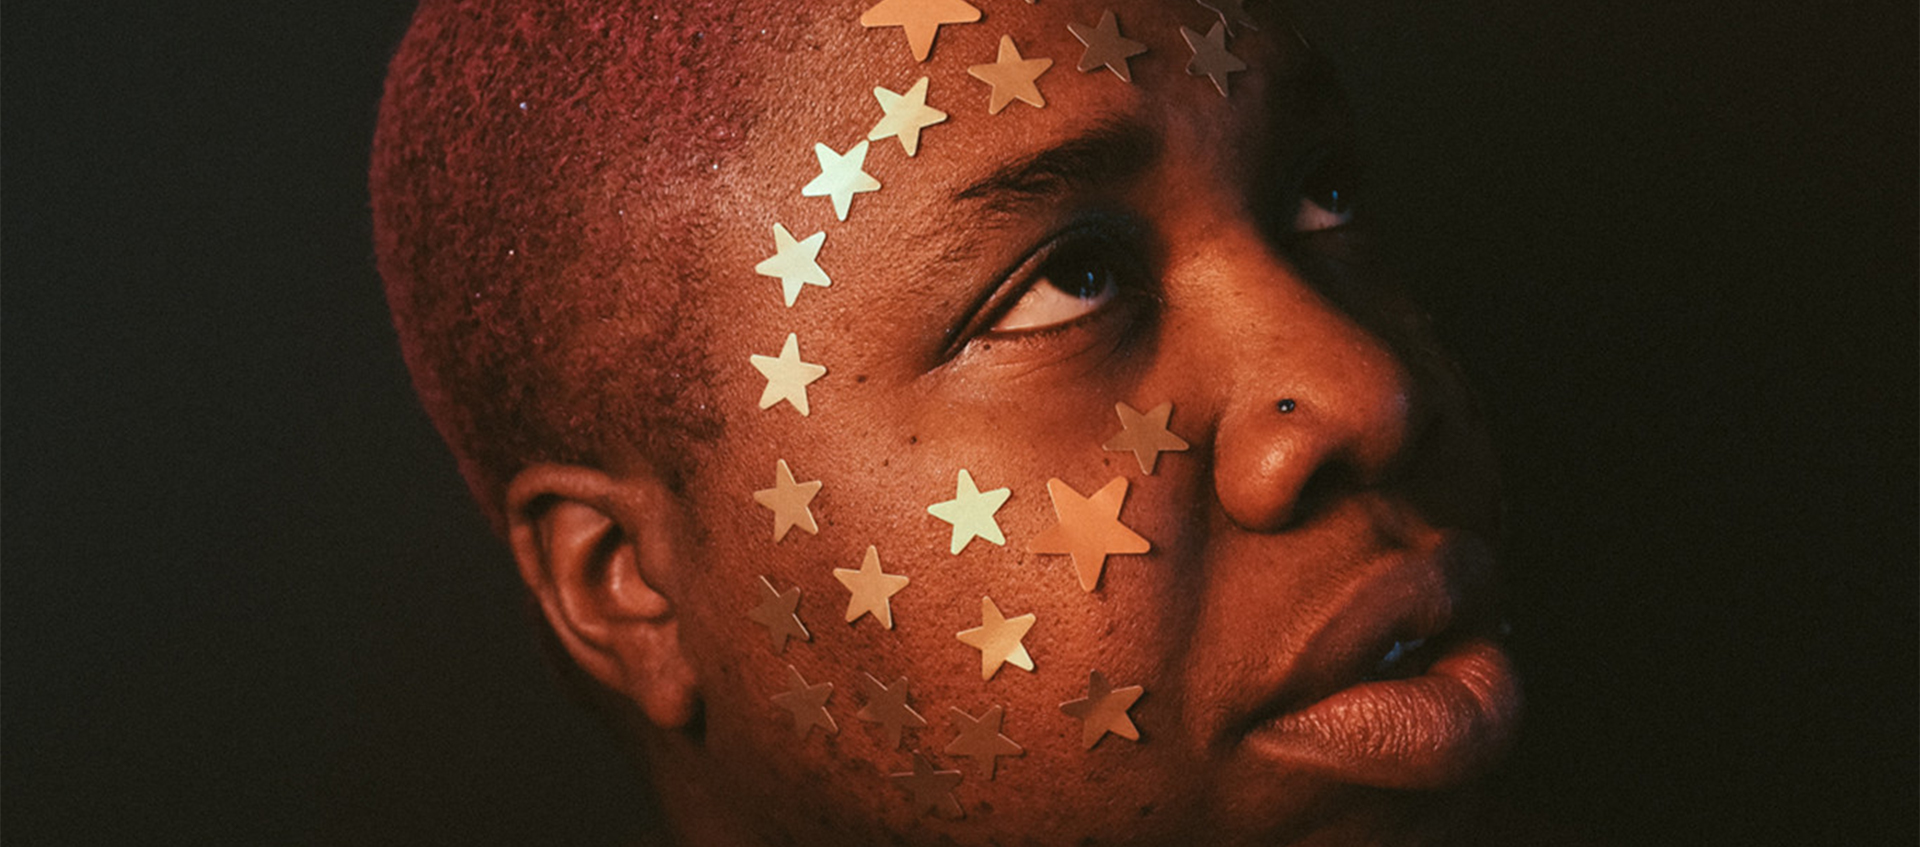 man with stars on face